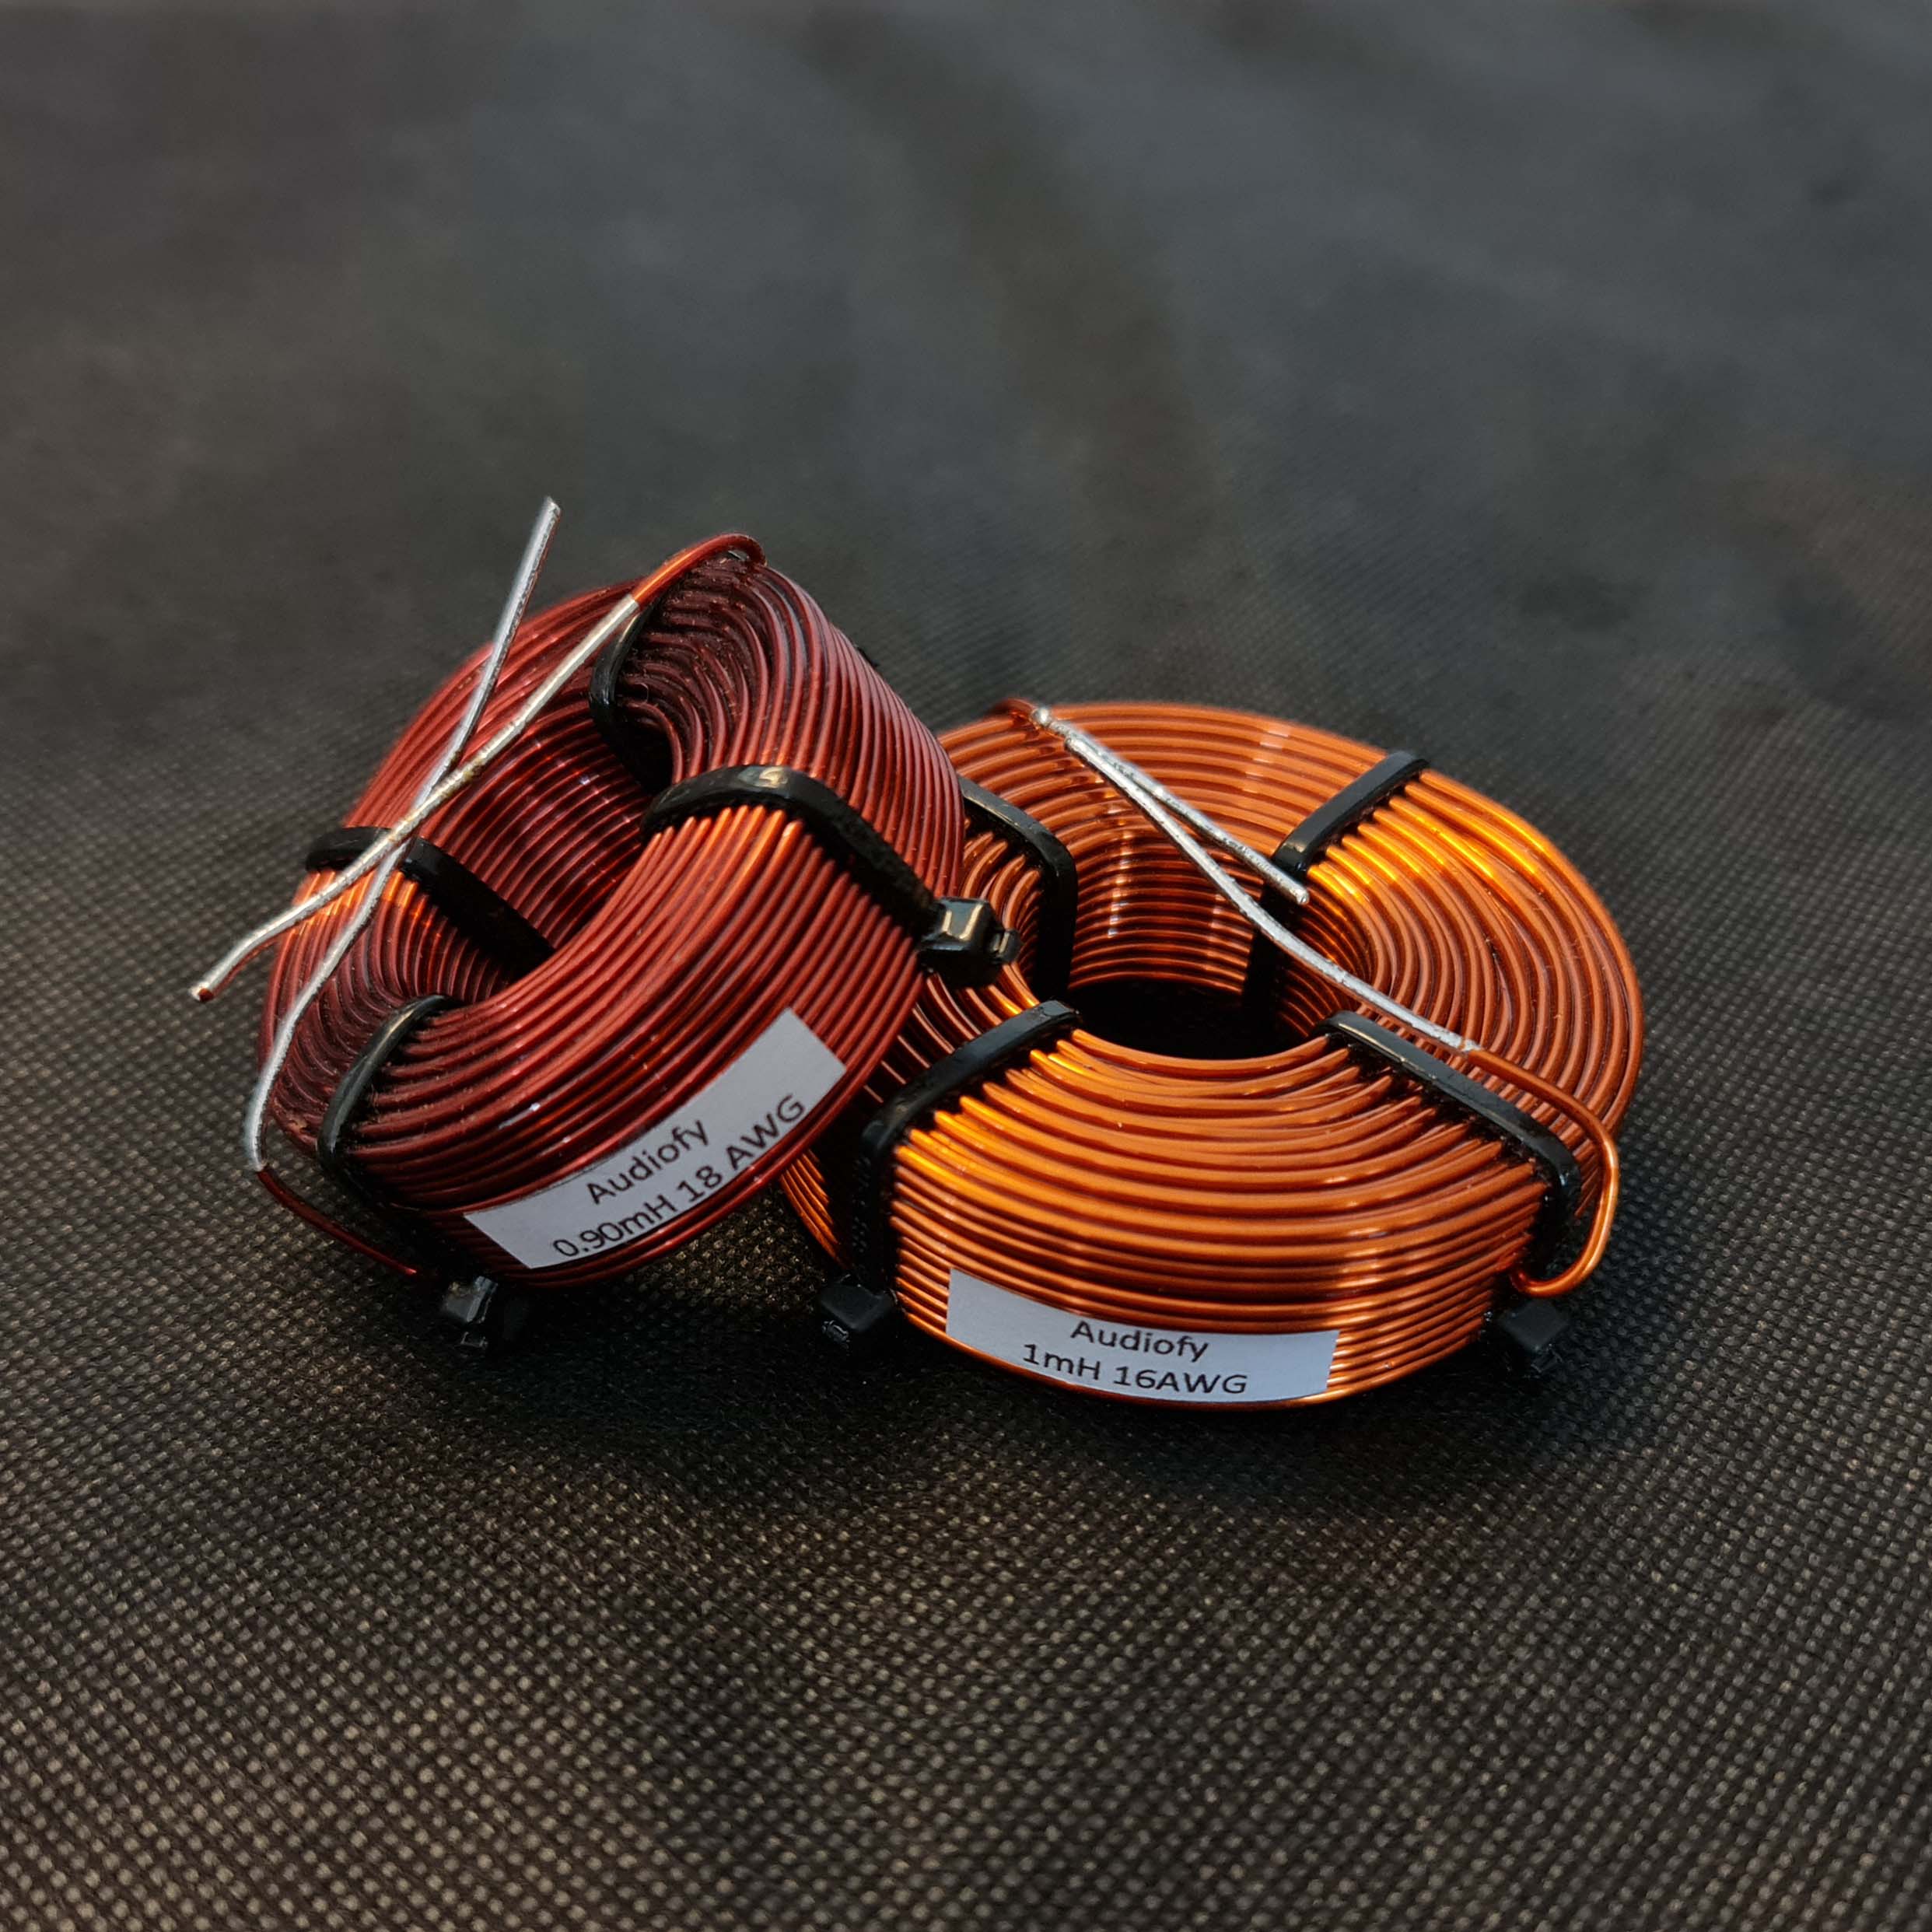 Audiofy 0.60mH 16 AWG Air Core Crossover Inductor